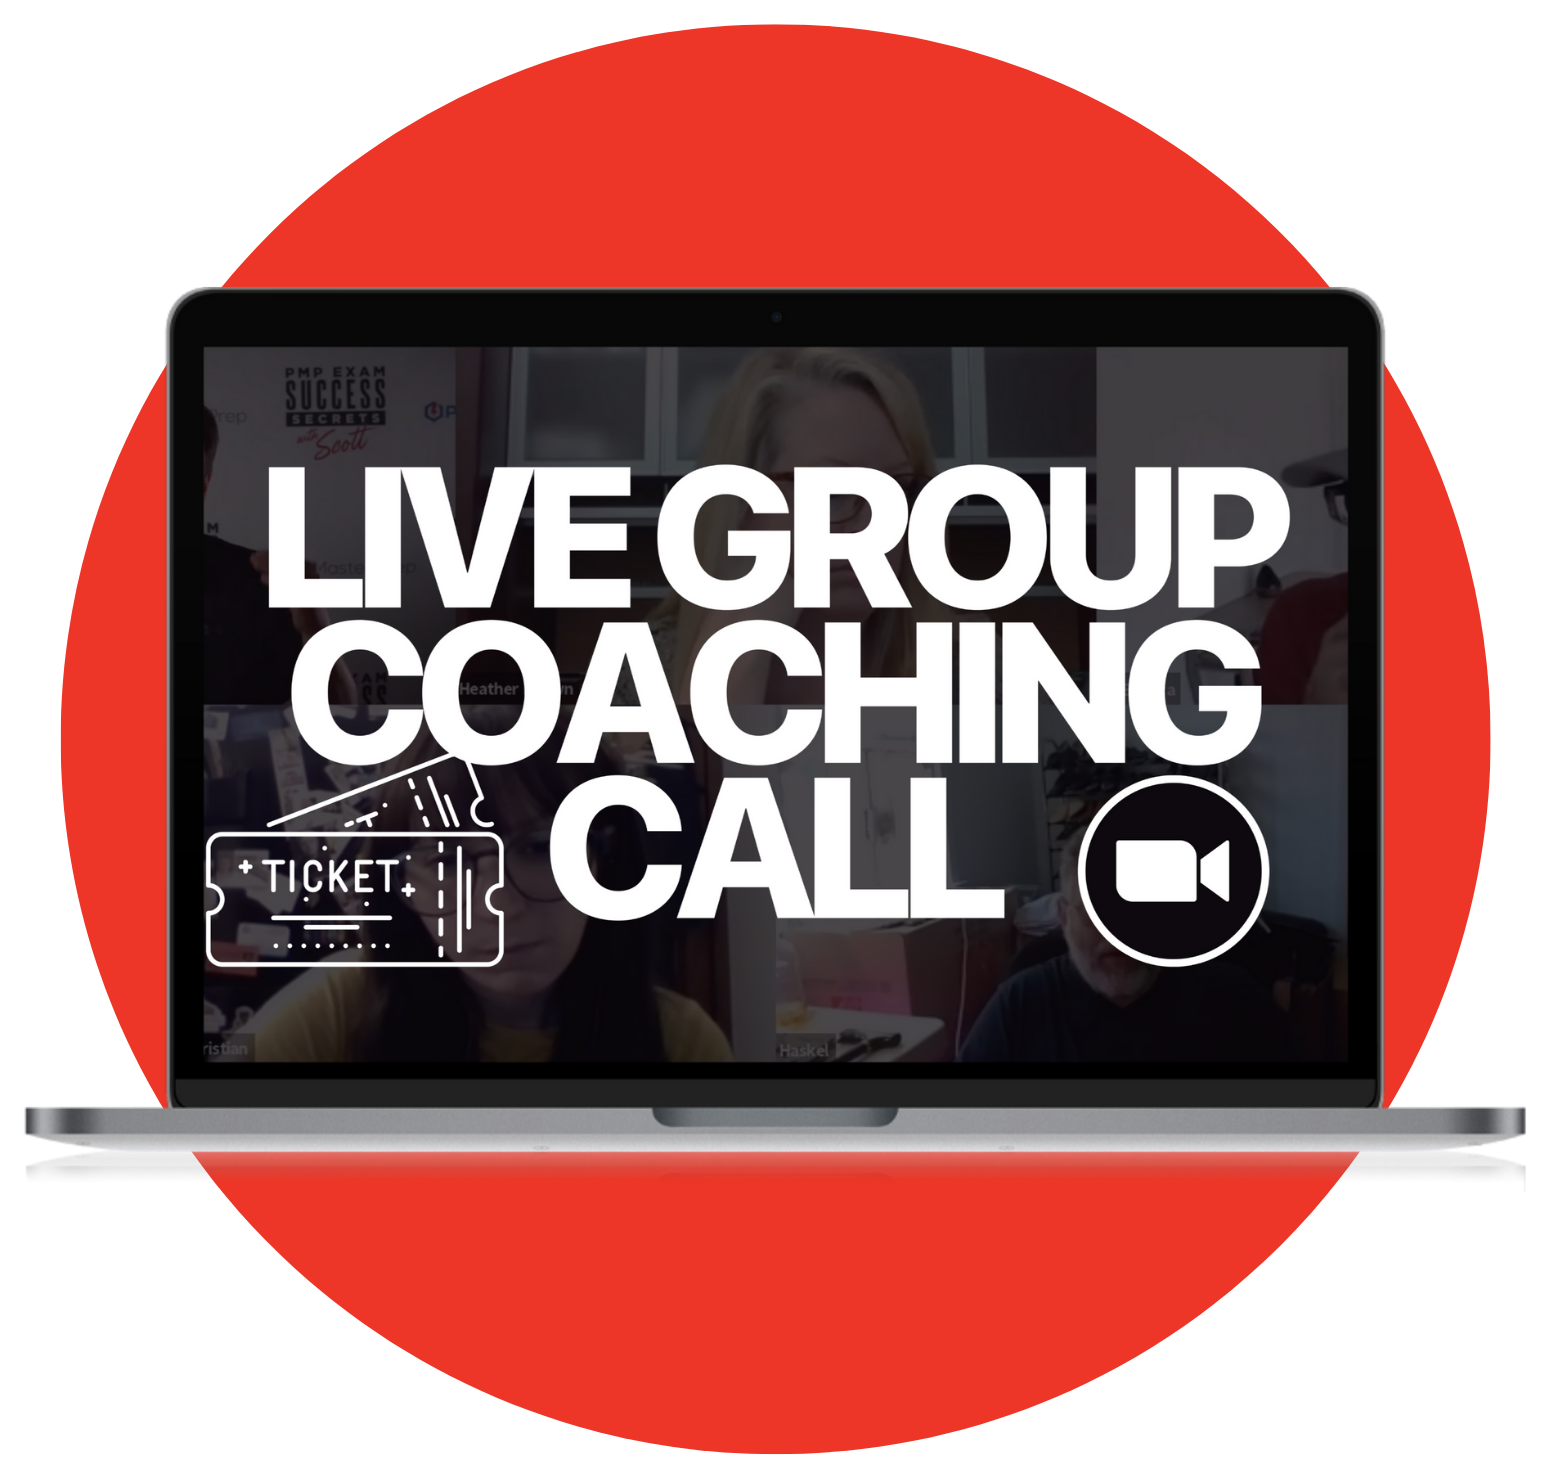 Two weekly live group coaching calls to keep you on track to ace the PMP exam.